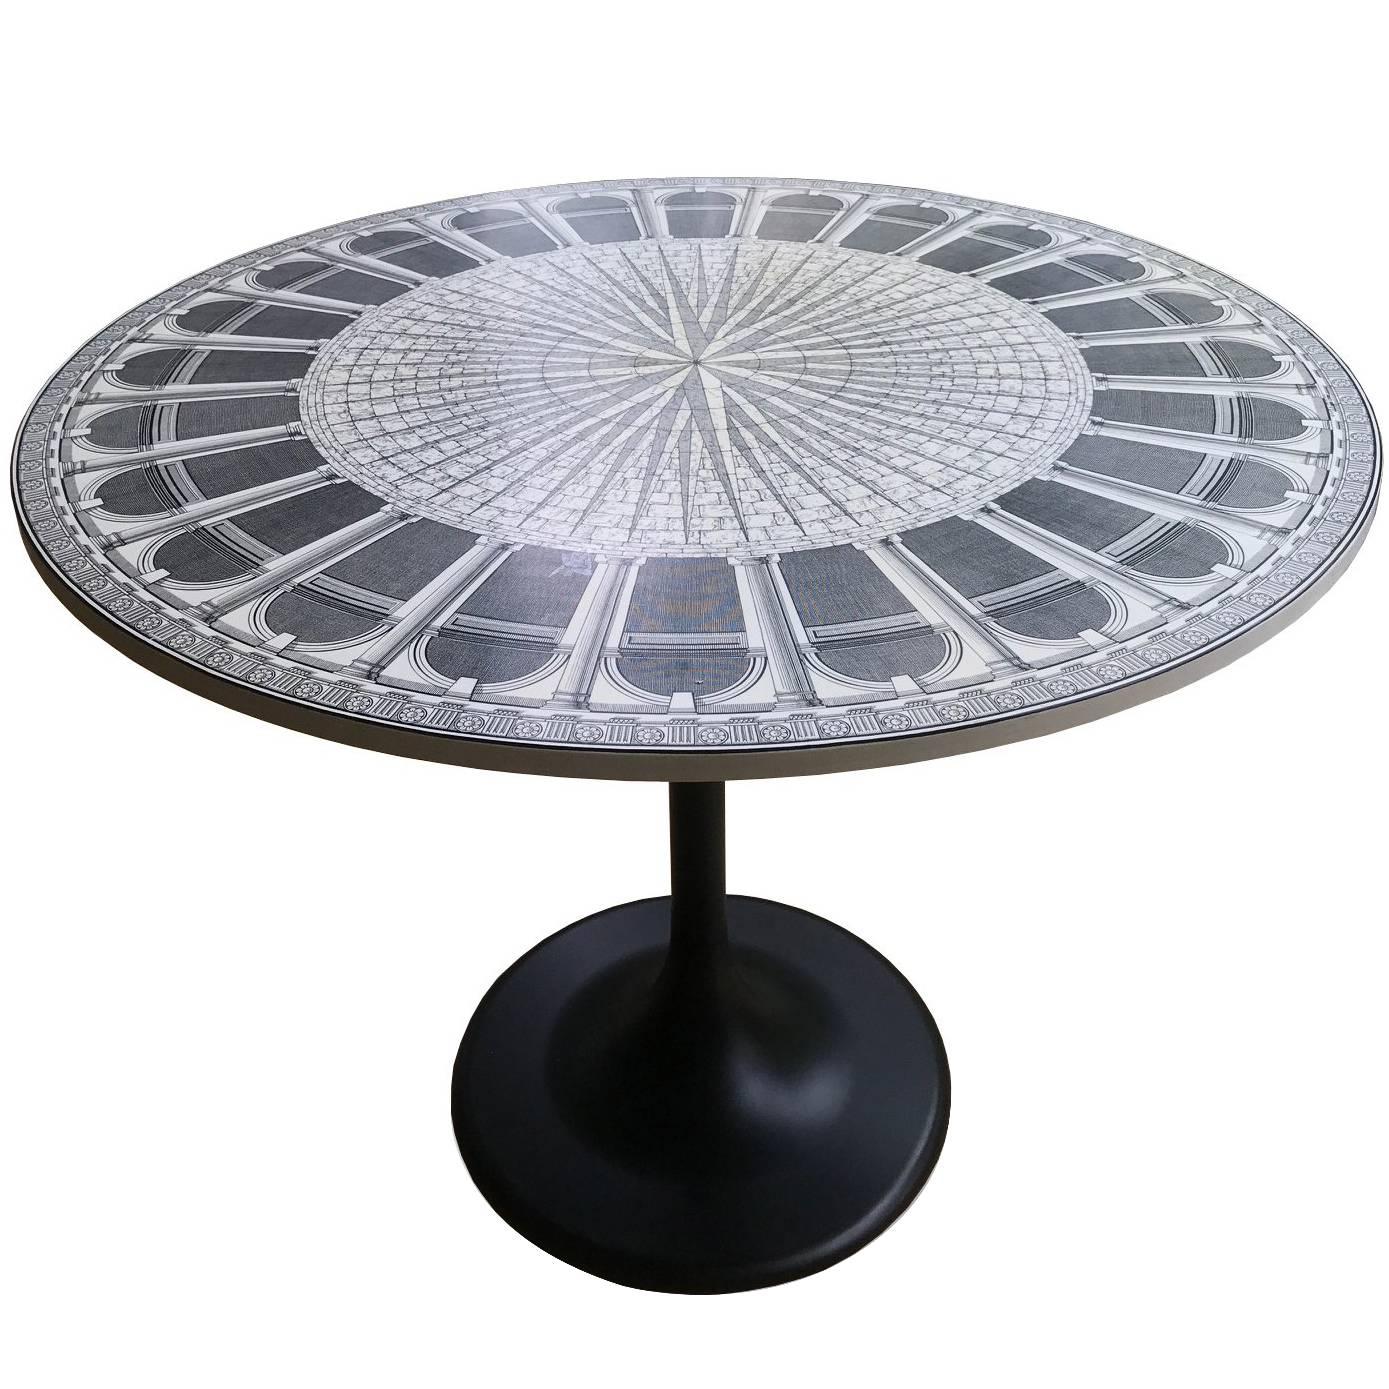 Piero Fornasetti "Architettura" Table, Signed and Limited Edition